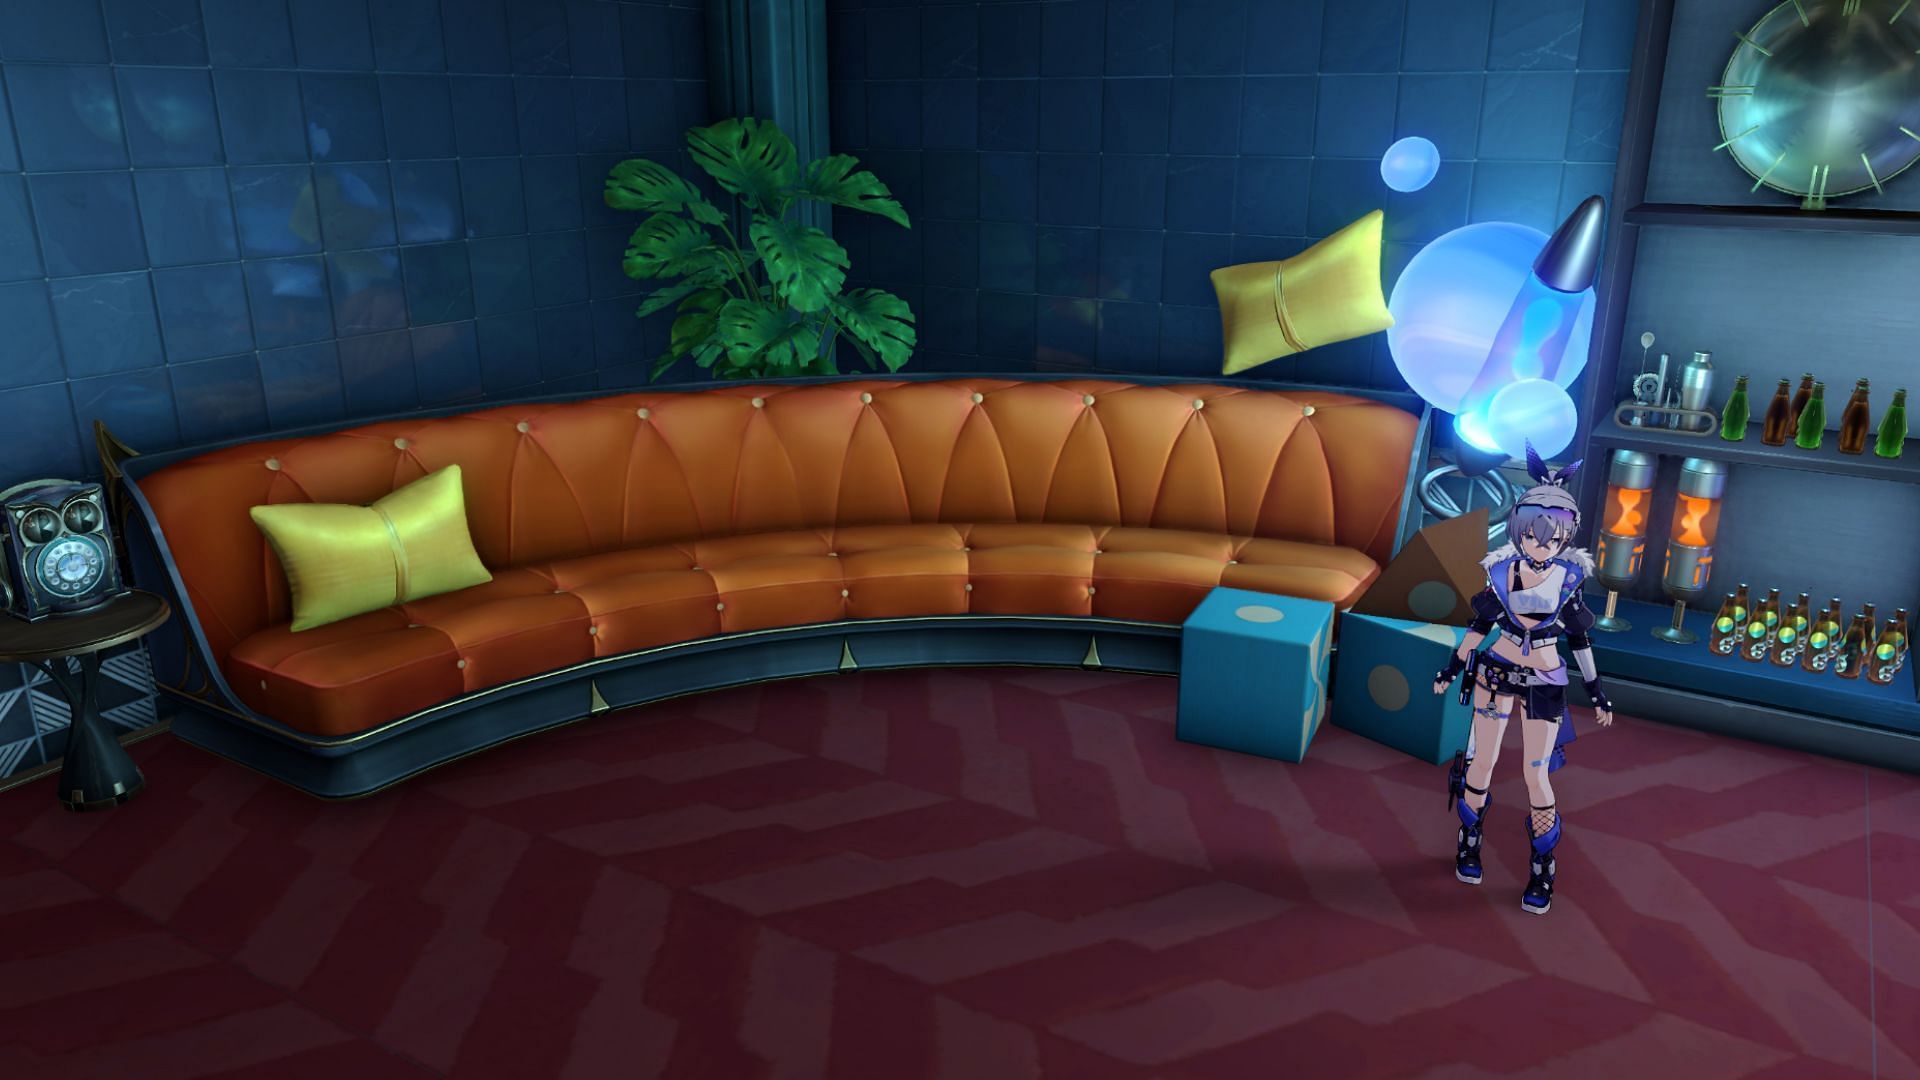 The Dream Ticker Supervisor will be in front of the couch (Image via HoYoverse)